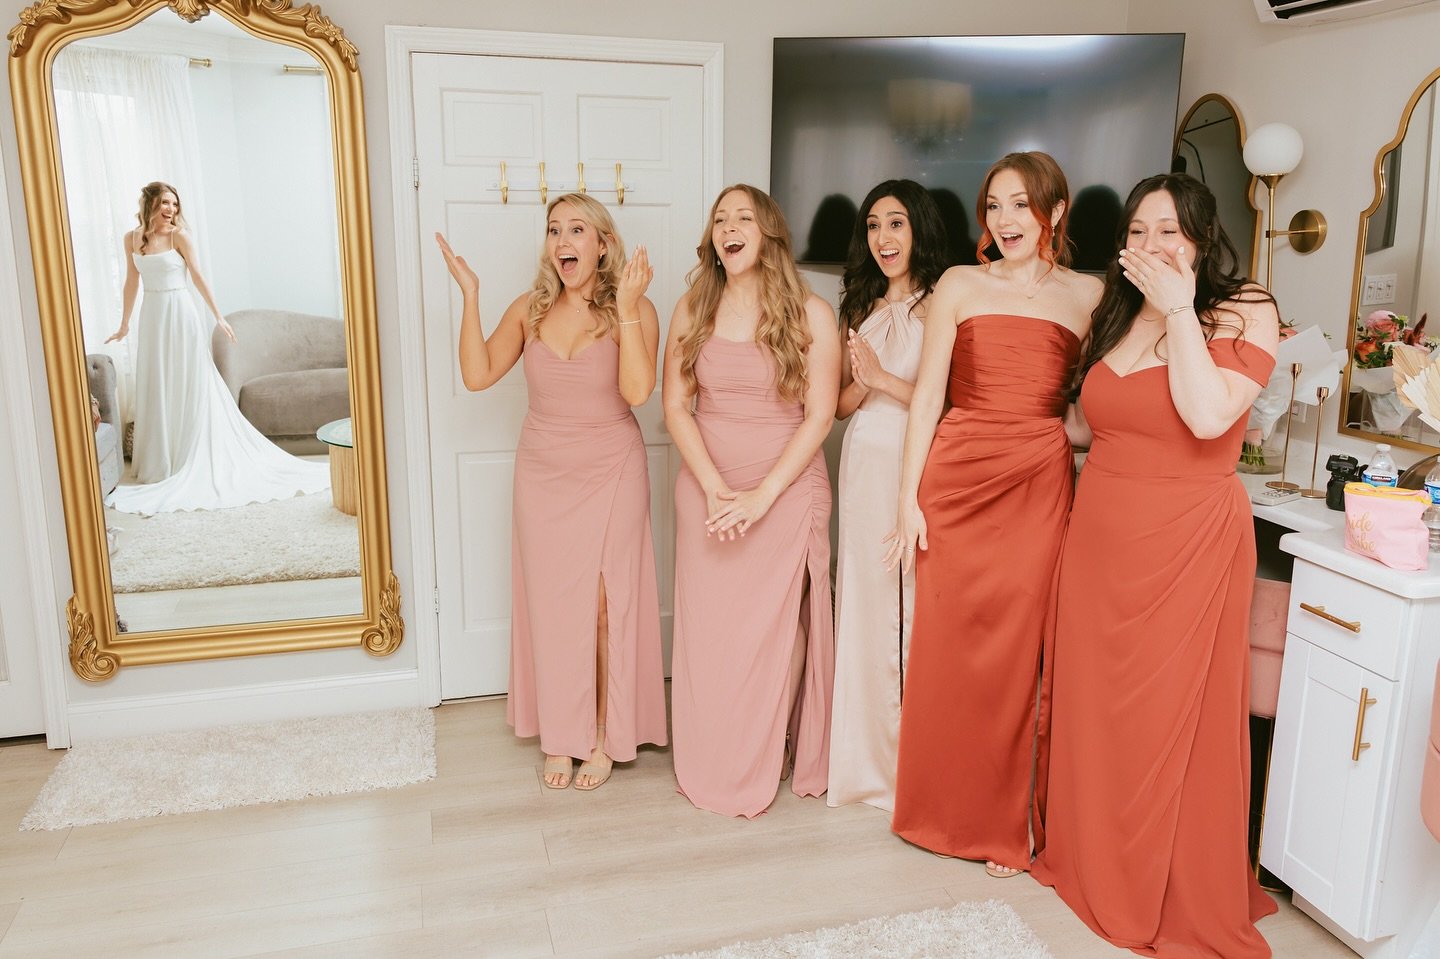 Capturing the pure excitement and emotion of the first look with the bridesmaids. 📸💕

Dress: @jennyyoonyc
Tux: @theblacktux 
Makeup / Hair: Boulevard Salon Roslyn 
Venue: @seacliffmanor_ 
Flower: @theflowerpotli 
Cake: @sistersconfections

#LongIsl